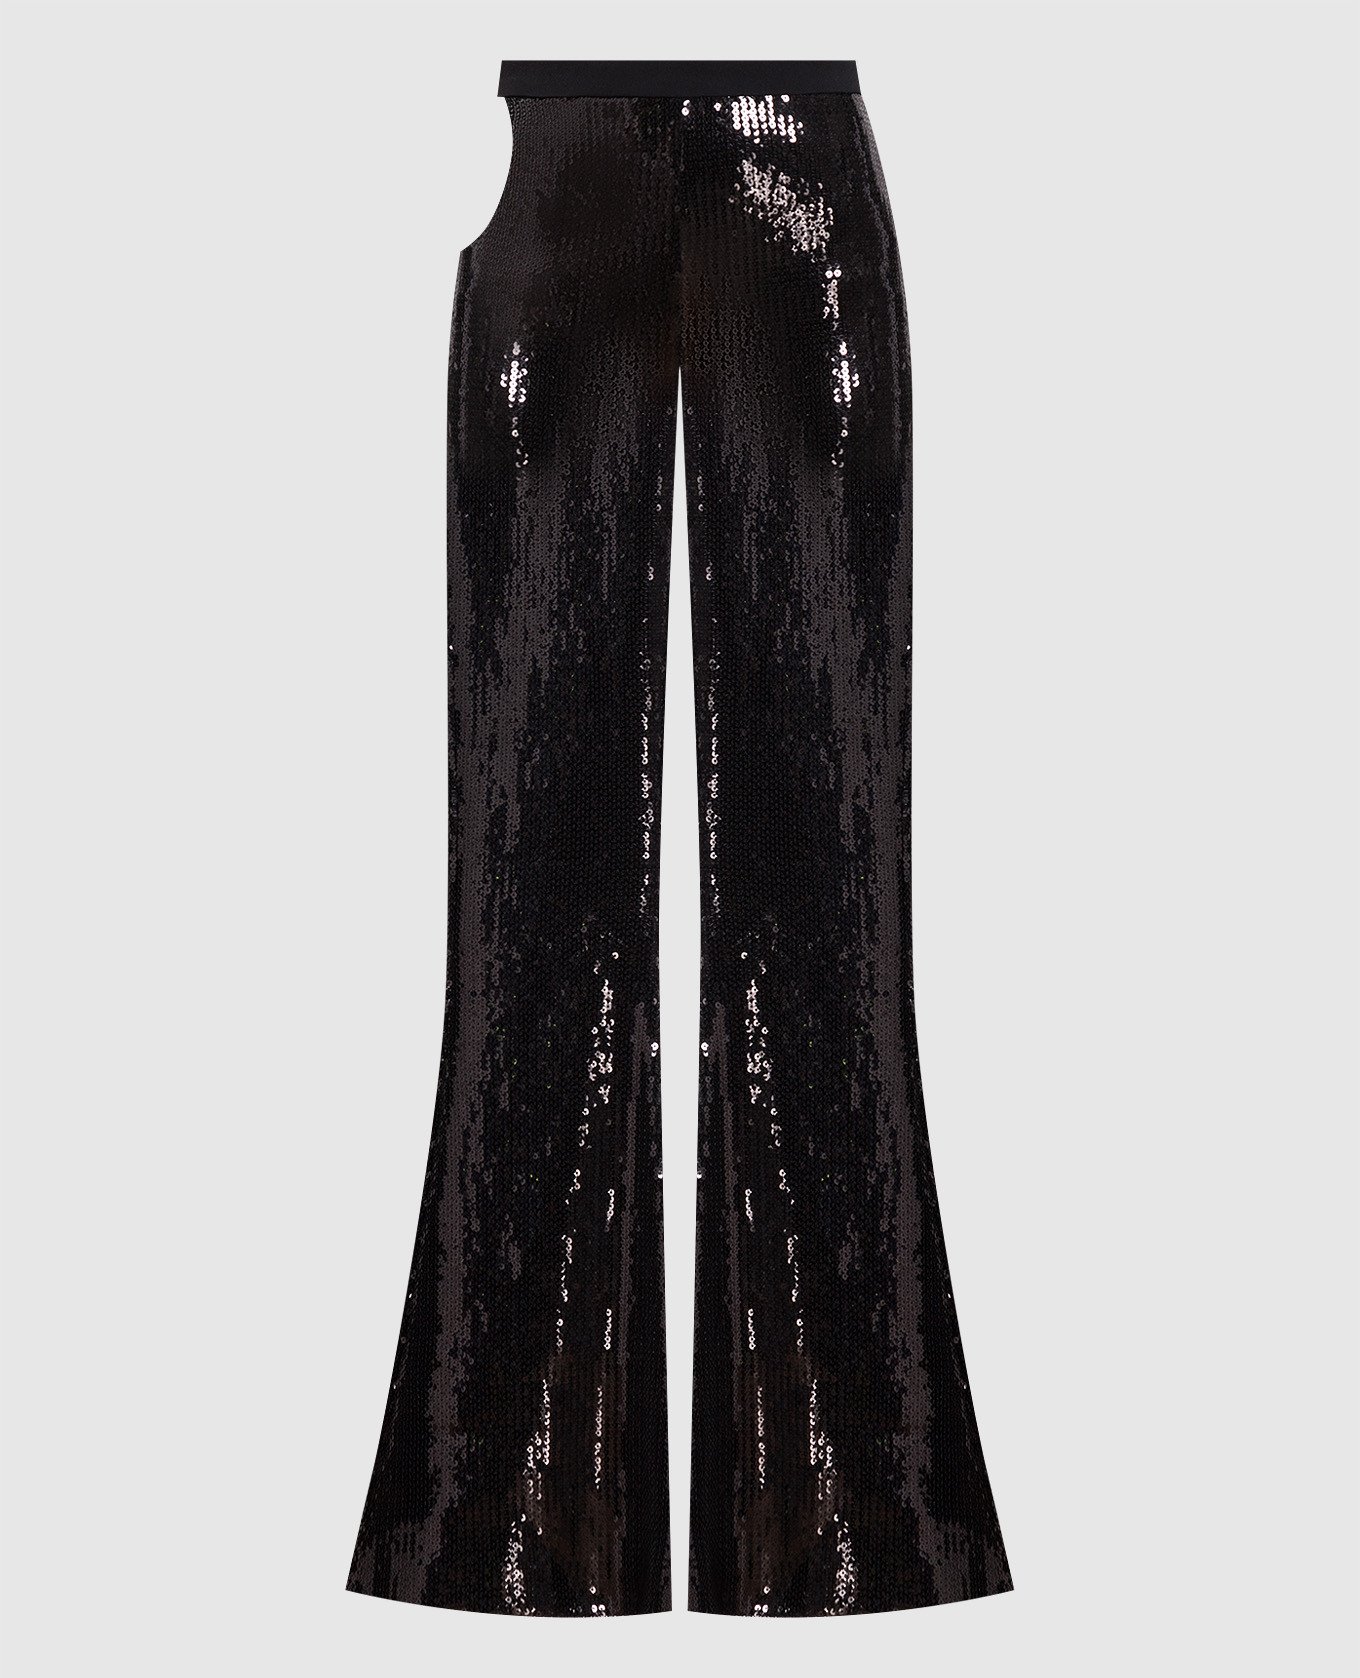 Black pants with sequins